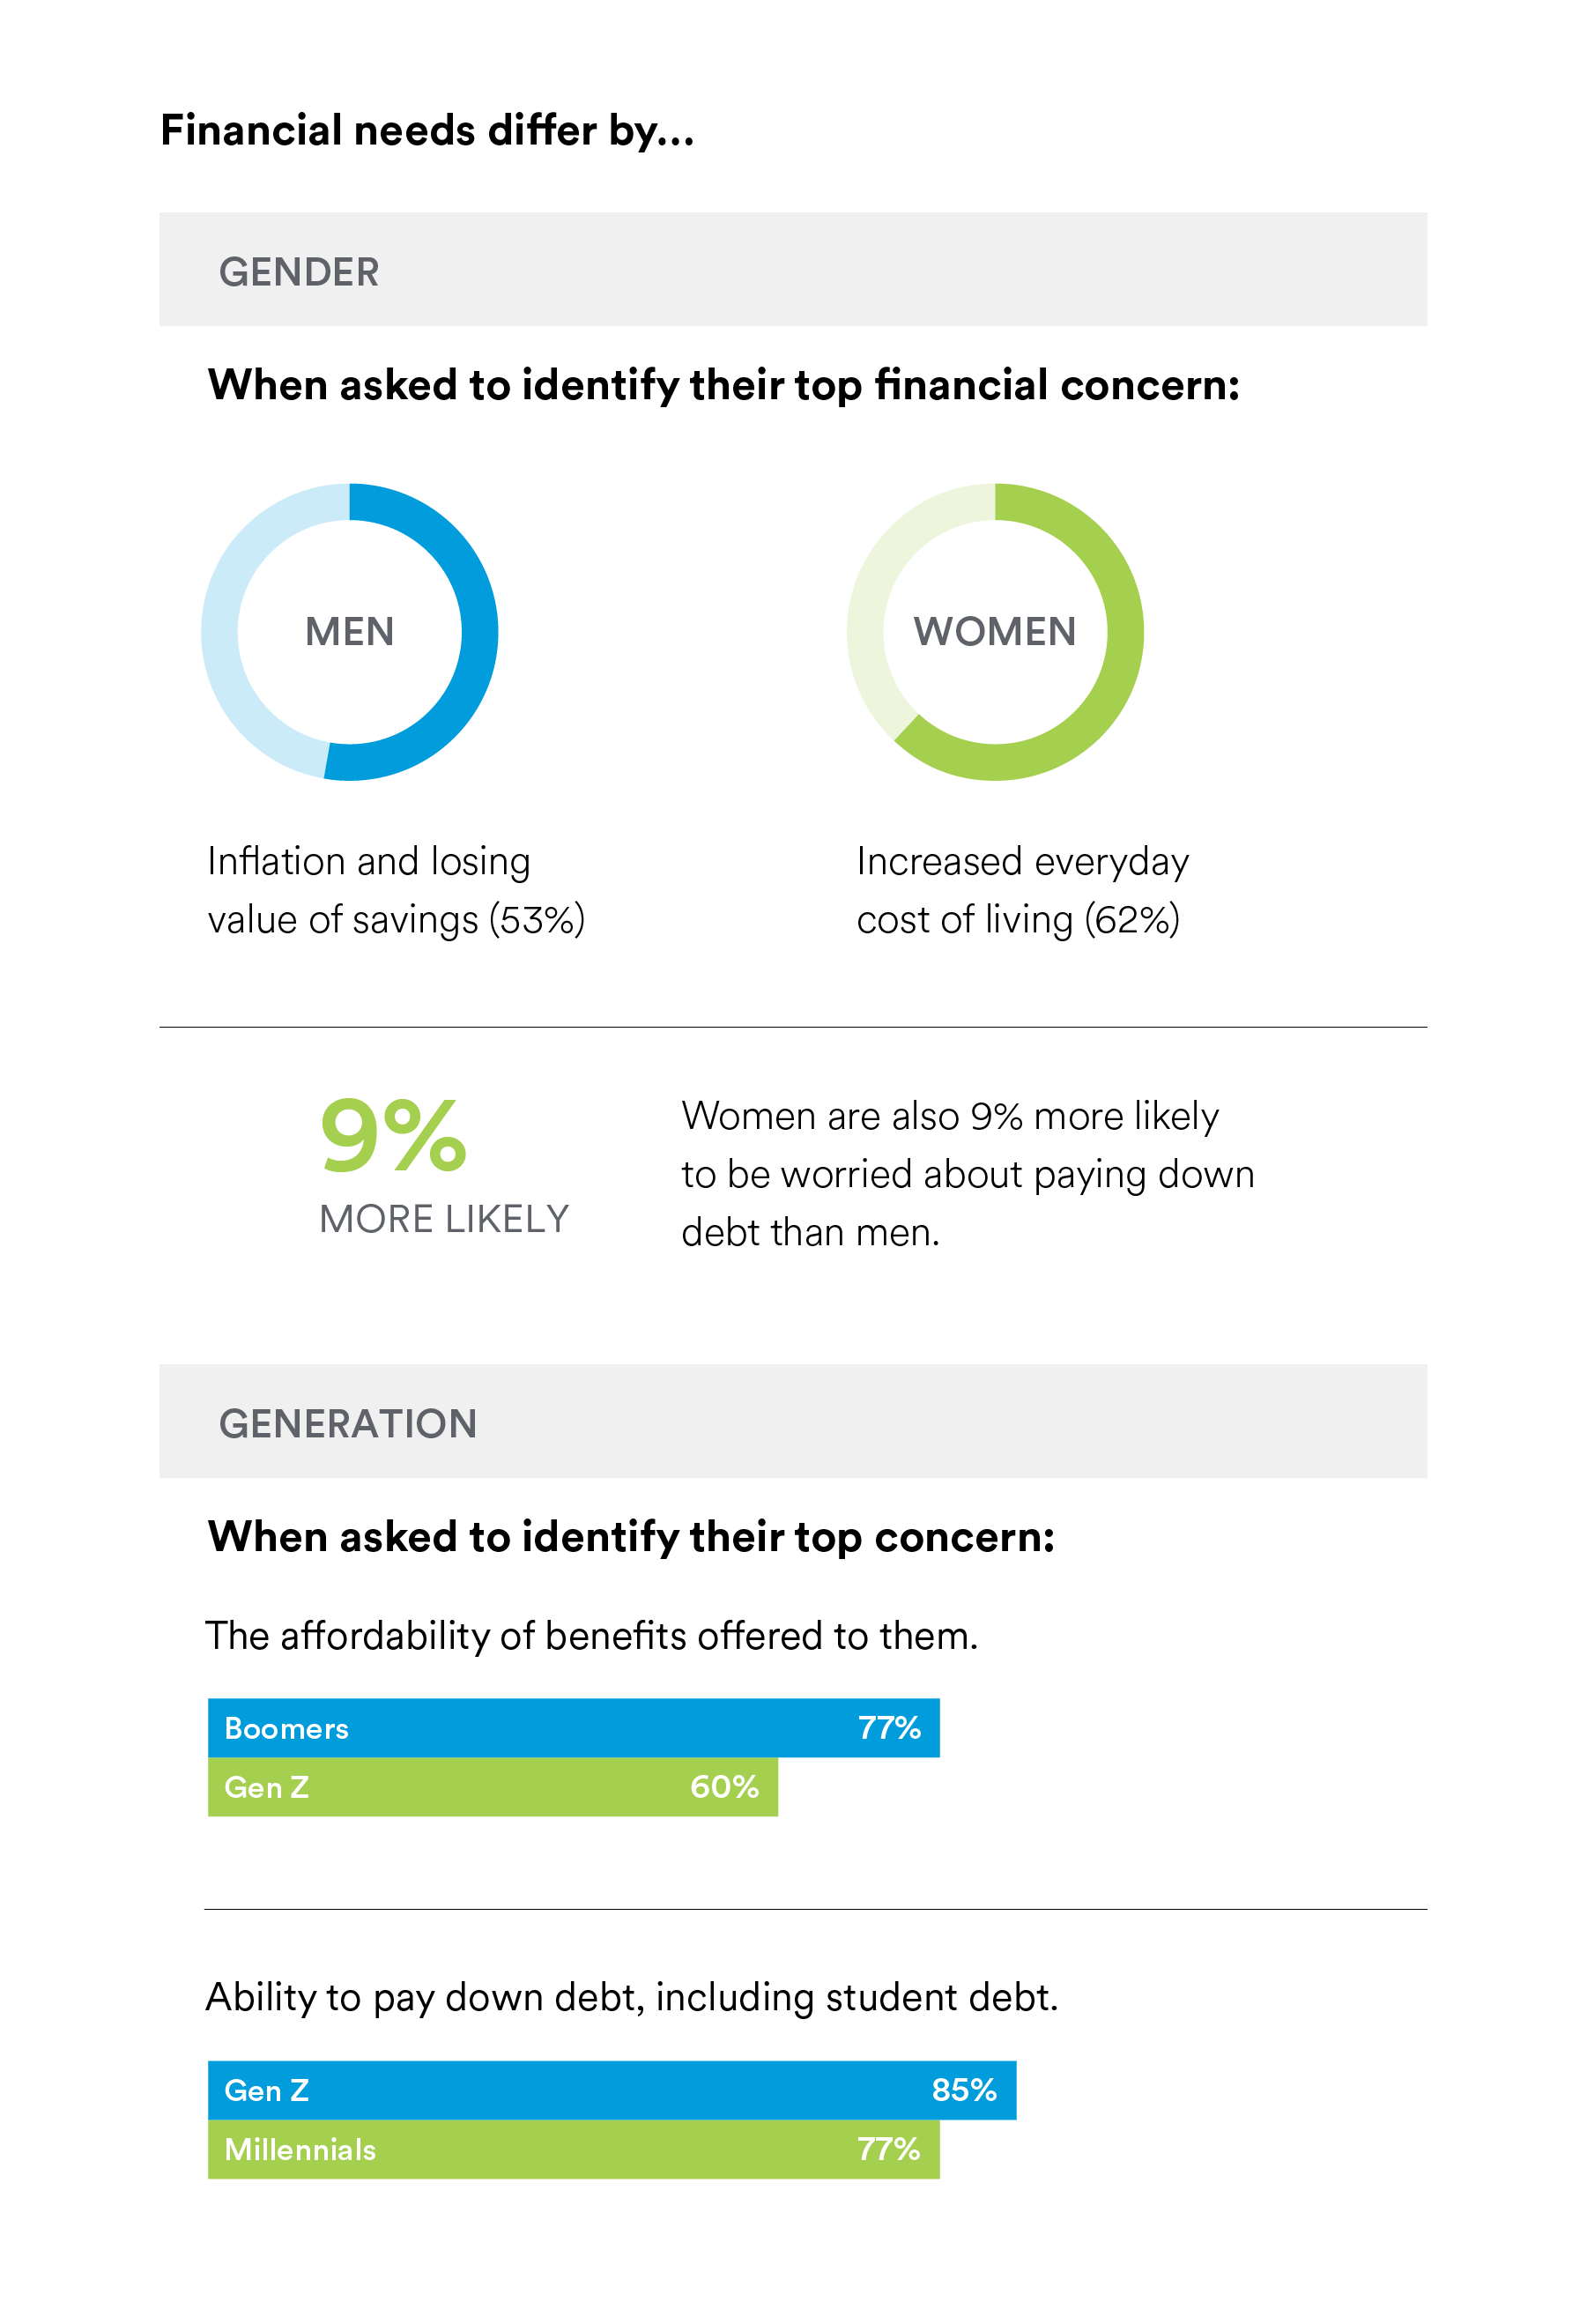 The top financial concern for surveyed men is inflation. For women, it’s the increased everyday cost of living. Compared to men, women are 9% more likely to be worried about paying down debt. Compared to Gen Z, Boomers are more worried about the affordability of benefits offered to them. Compared to Millennials, Gen Z is more worried about their ability to pay down debt, including student debt. 